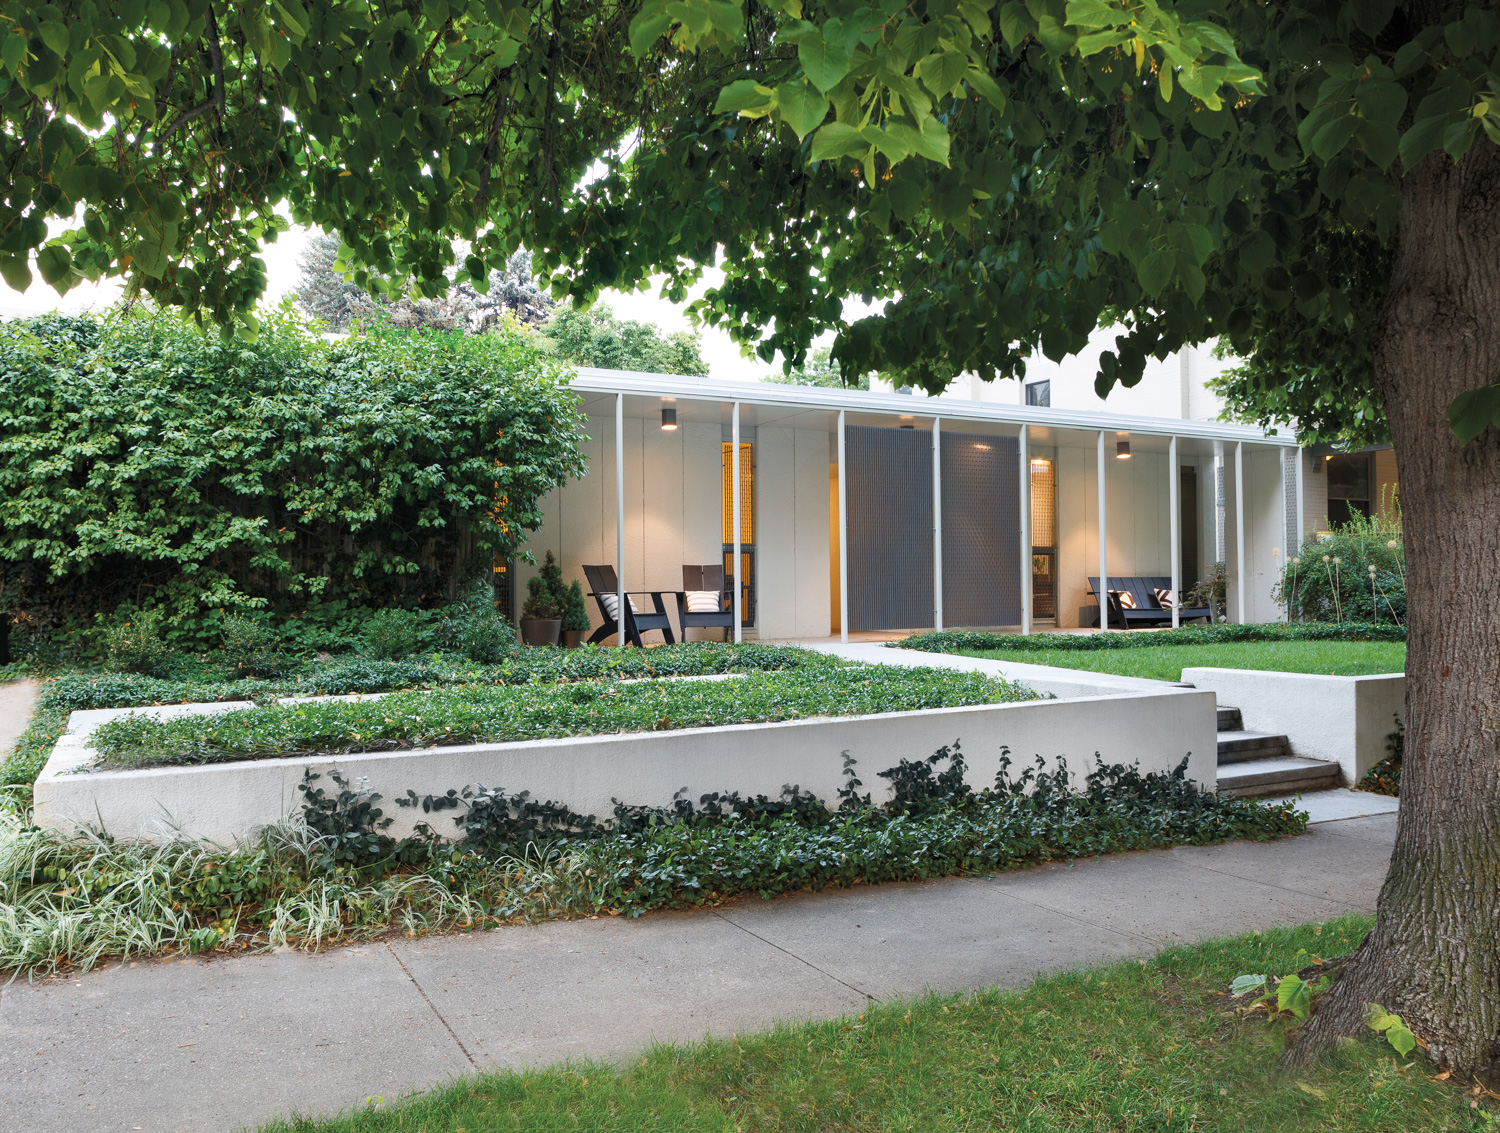 façade of this midcentury modern home with slender windows and front deck area